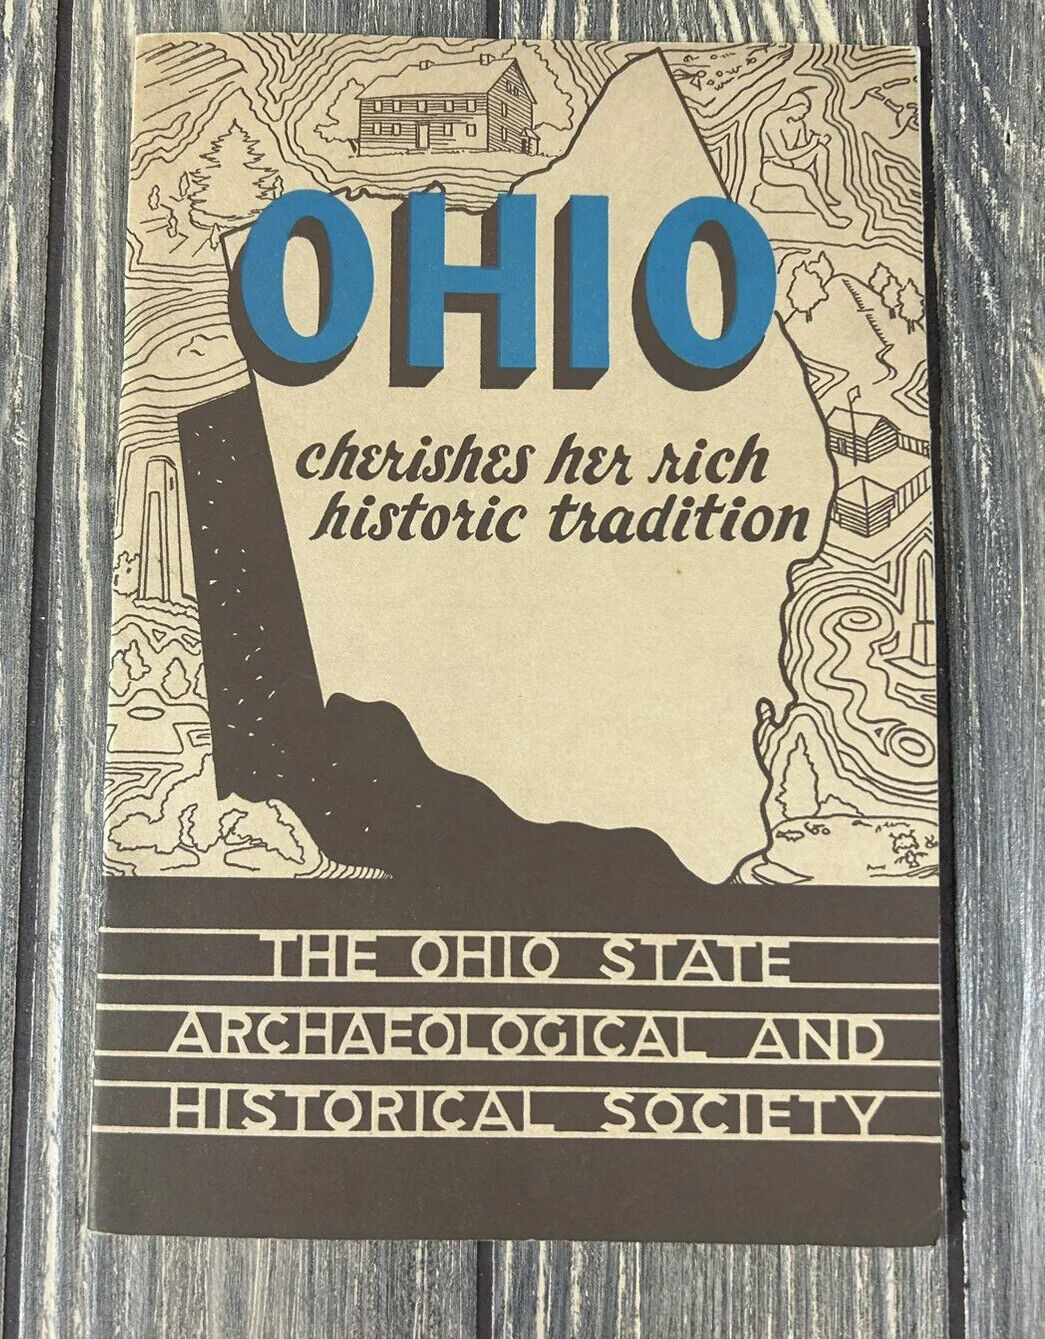 Vintage Ohio Cherishes Her Rich Historic Tradition Booklet The Ohio State Archeo